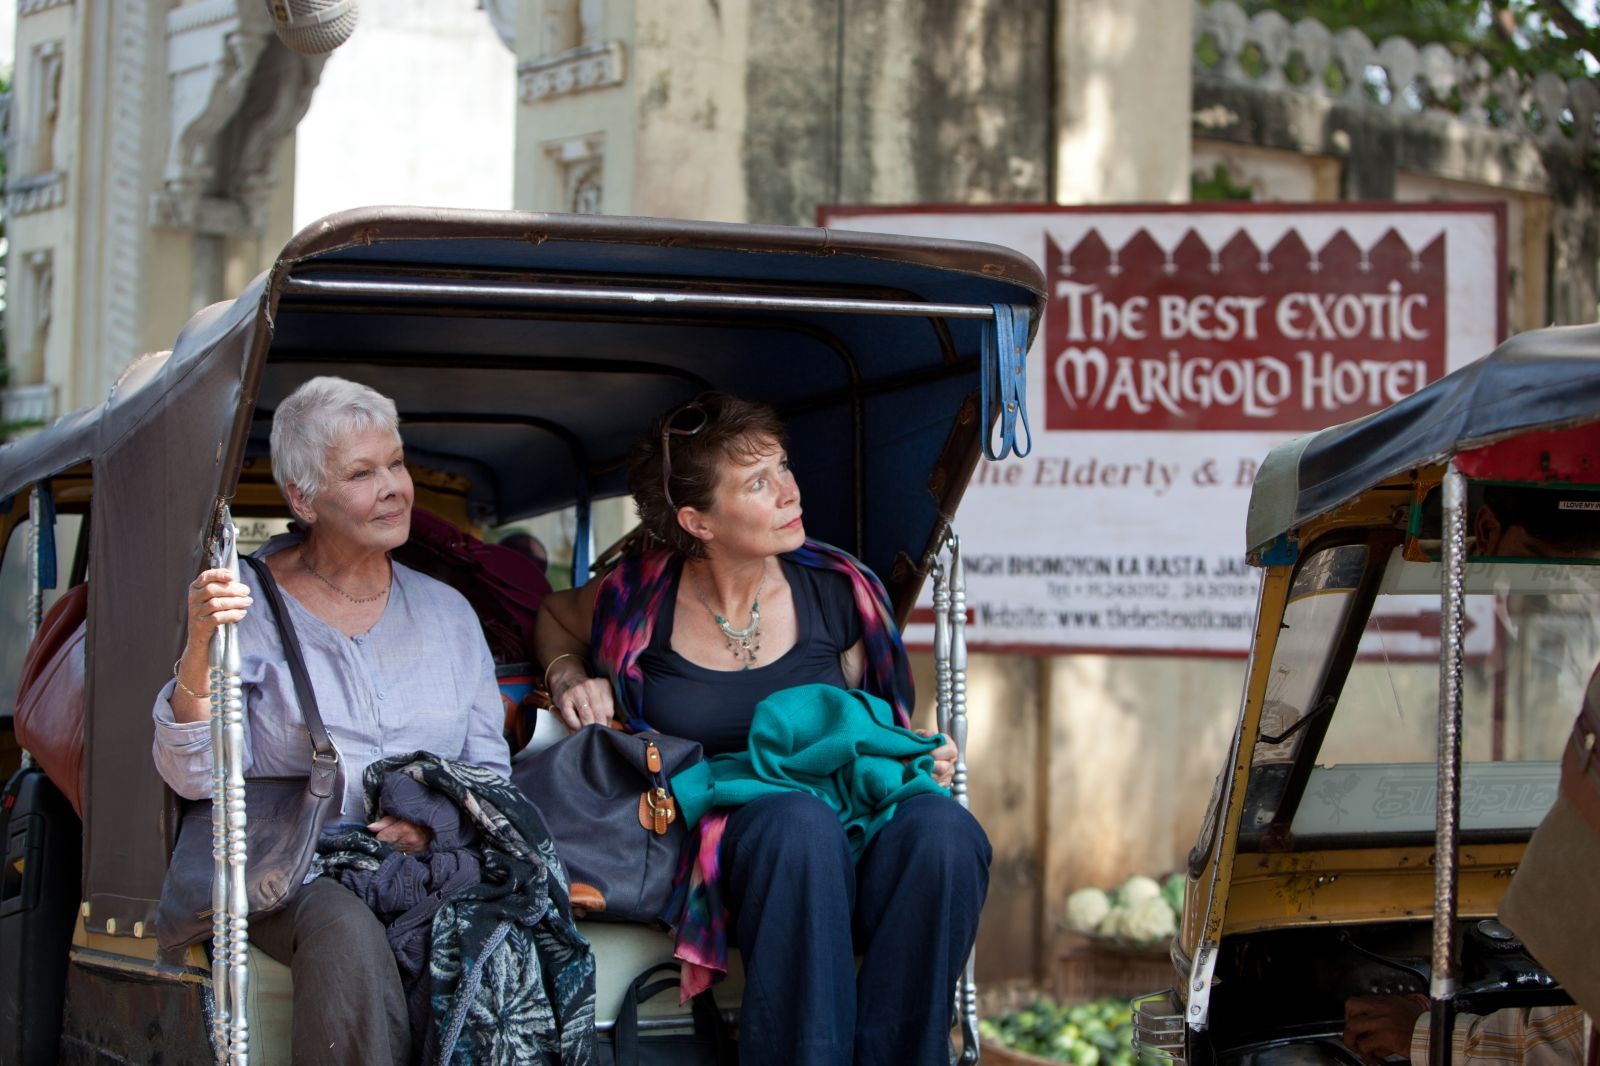 Judi Dench stars as Evelyn and Celia Imrie stars as Madge in Fox Searchlight Pictures' The Best Exotic Marigold Hotel (2012). Photo credit by Ishika Mohan.